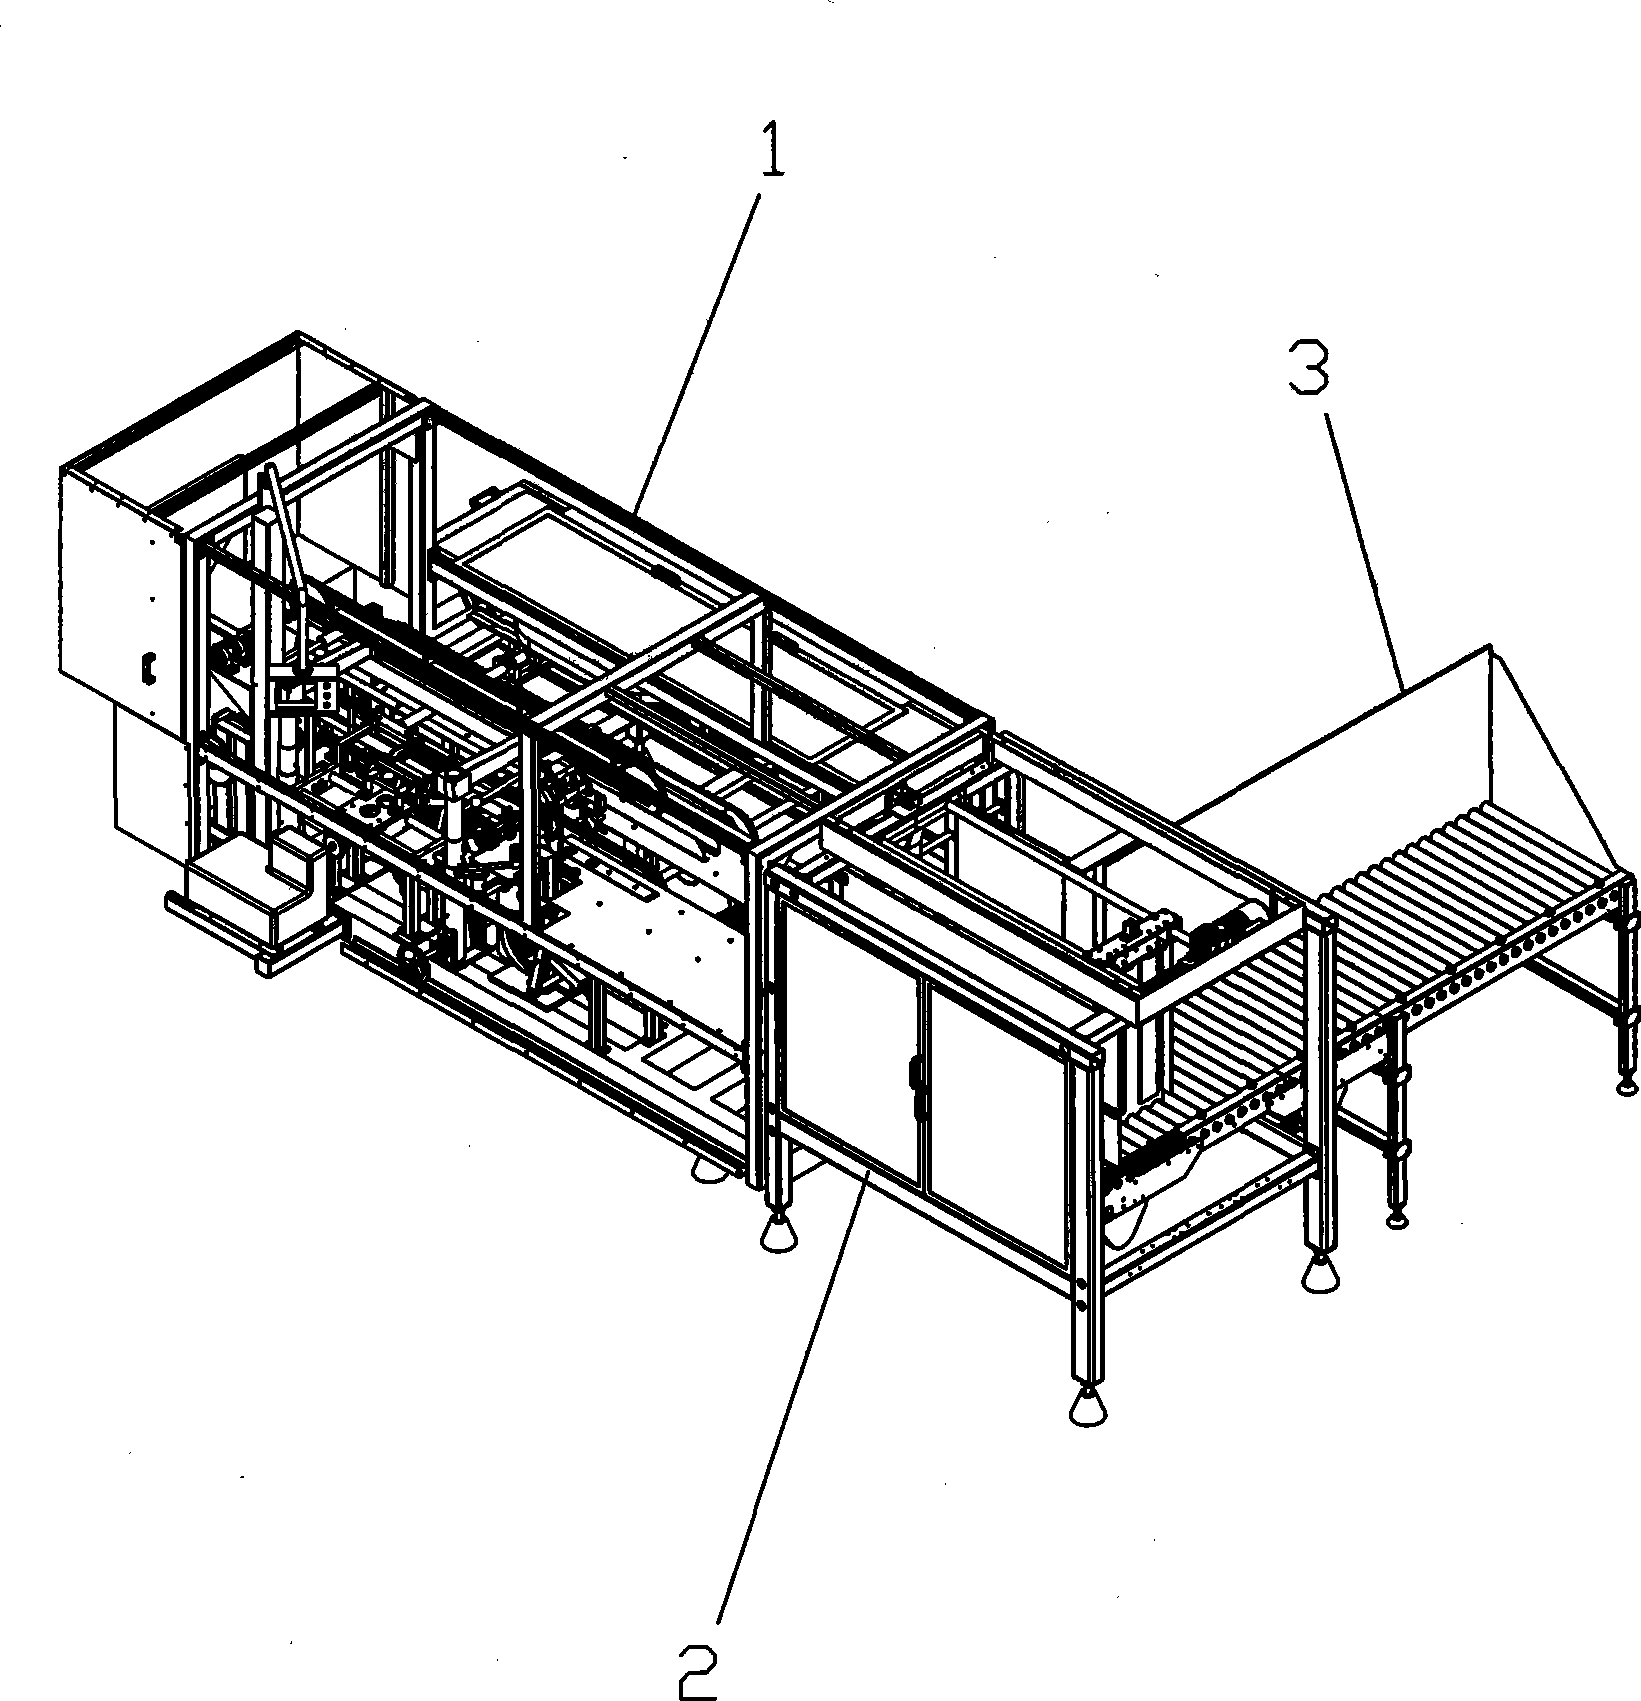 High-speed paper carton forming device